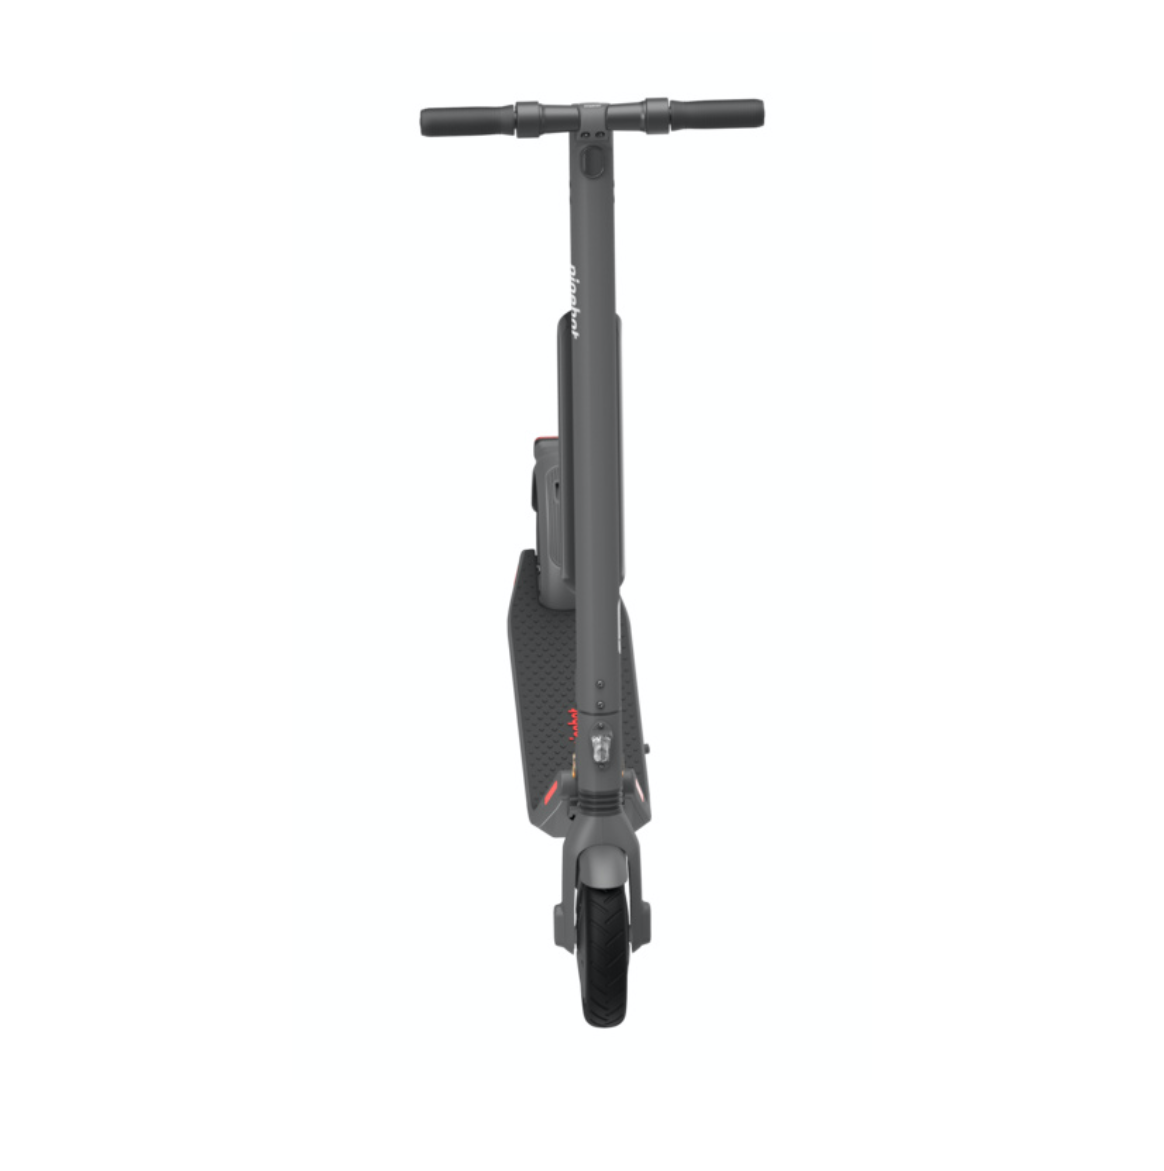 Scooter Ninebot E-Scooter 300 Watt by E45D – Toolbrothers Kick Segway Elektro Roller